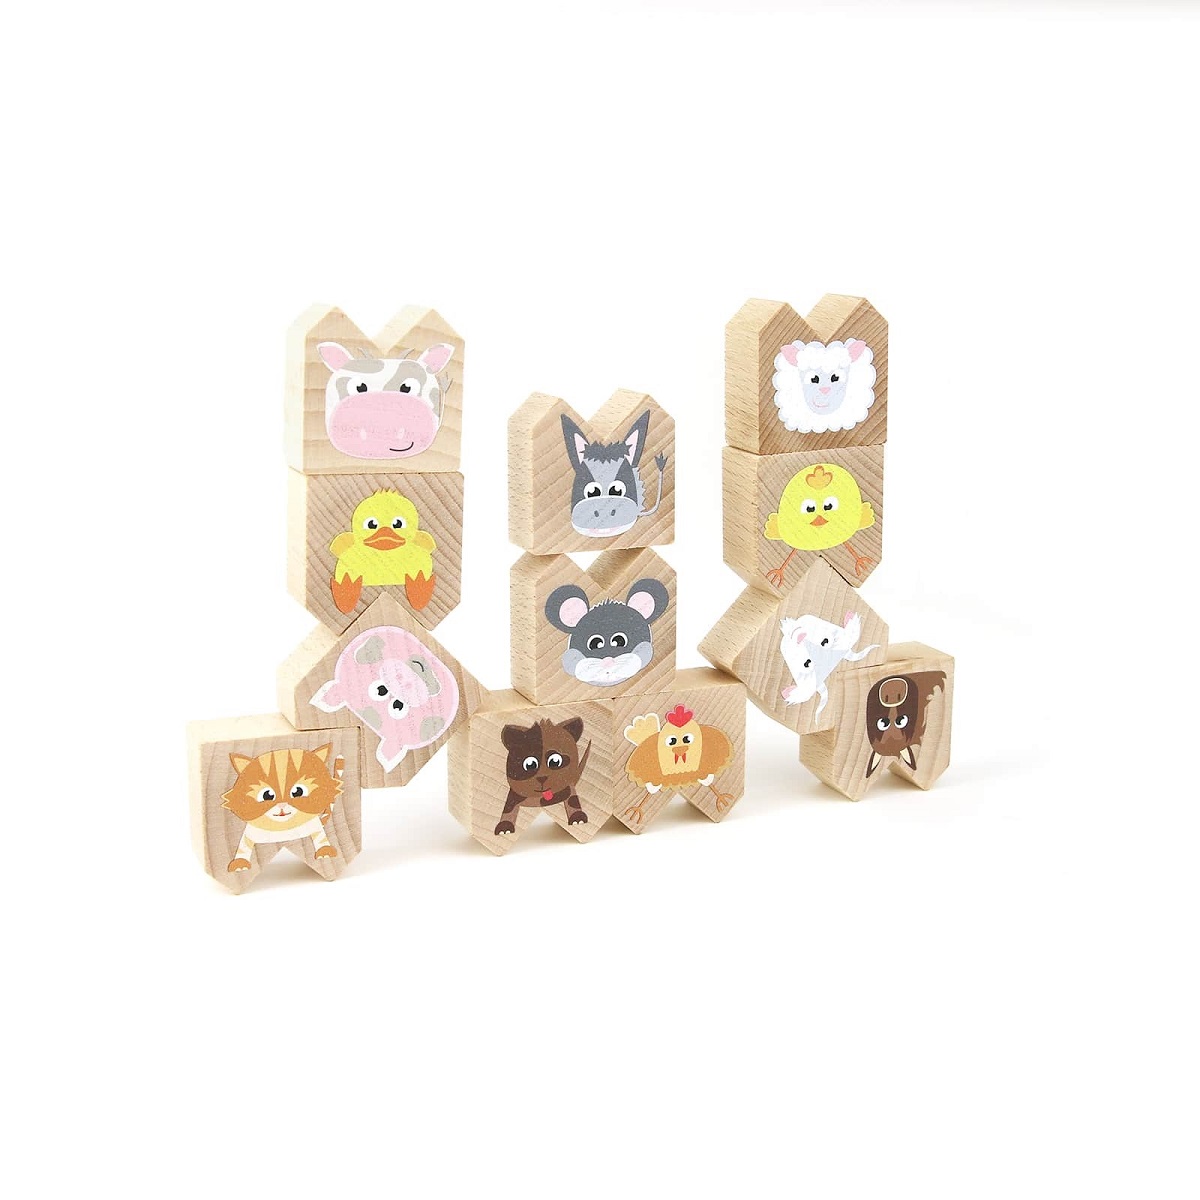 Milaniwood Game - Upside-Down Animals Farm WHILE QTY LAST 